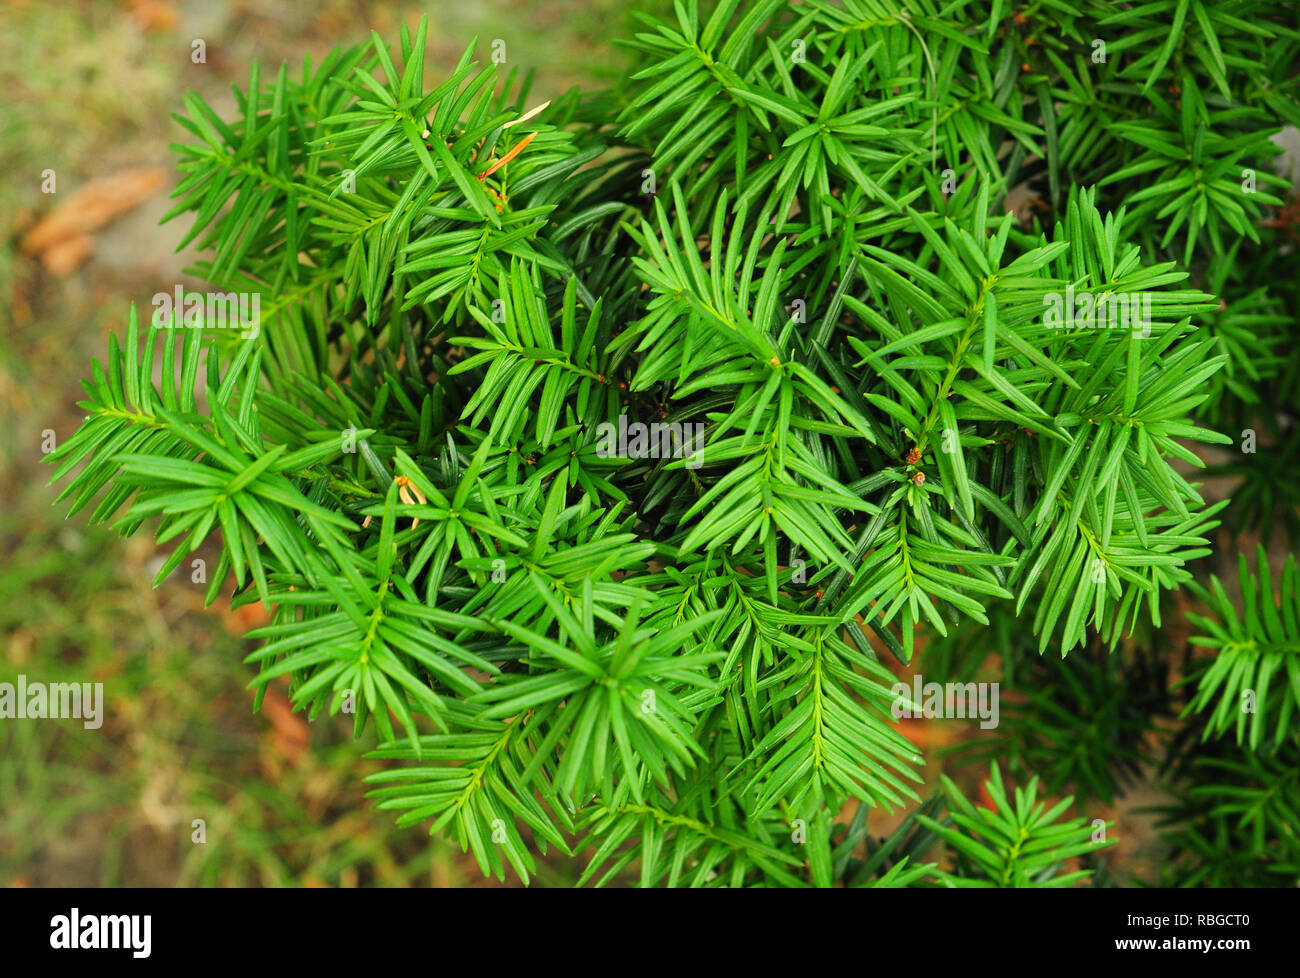 Yew tree. Taxus baccata. It is the tree originally known as yew, though ...